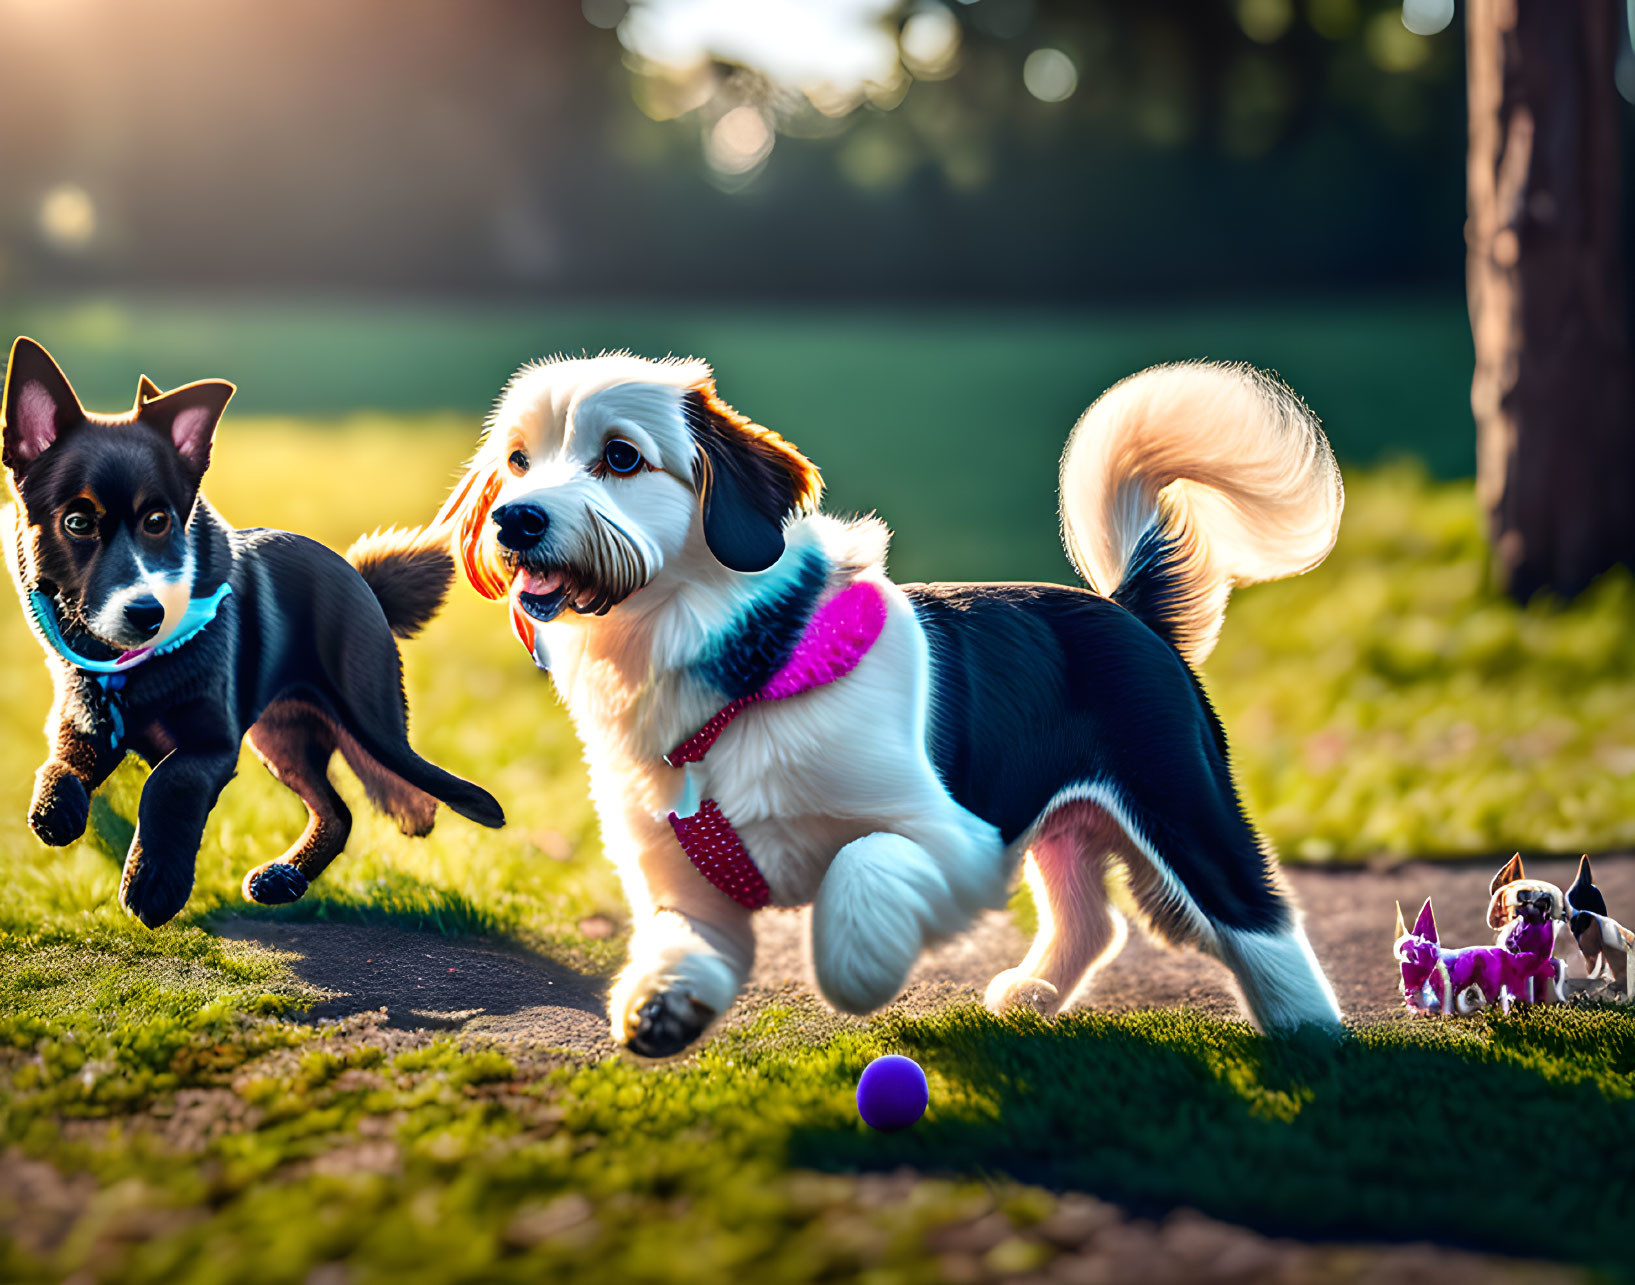 Two Dogs Playing Outdoors with Purple Ball on Sunny Day